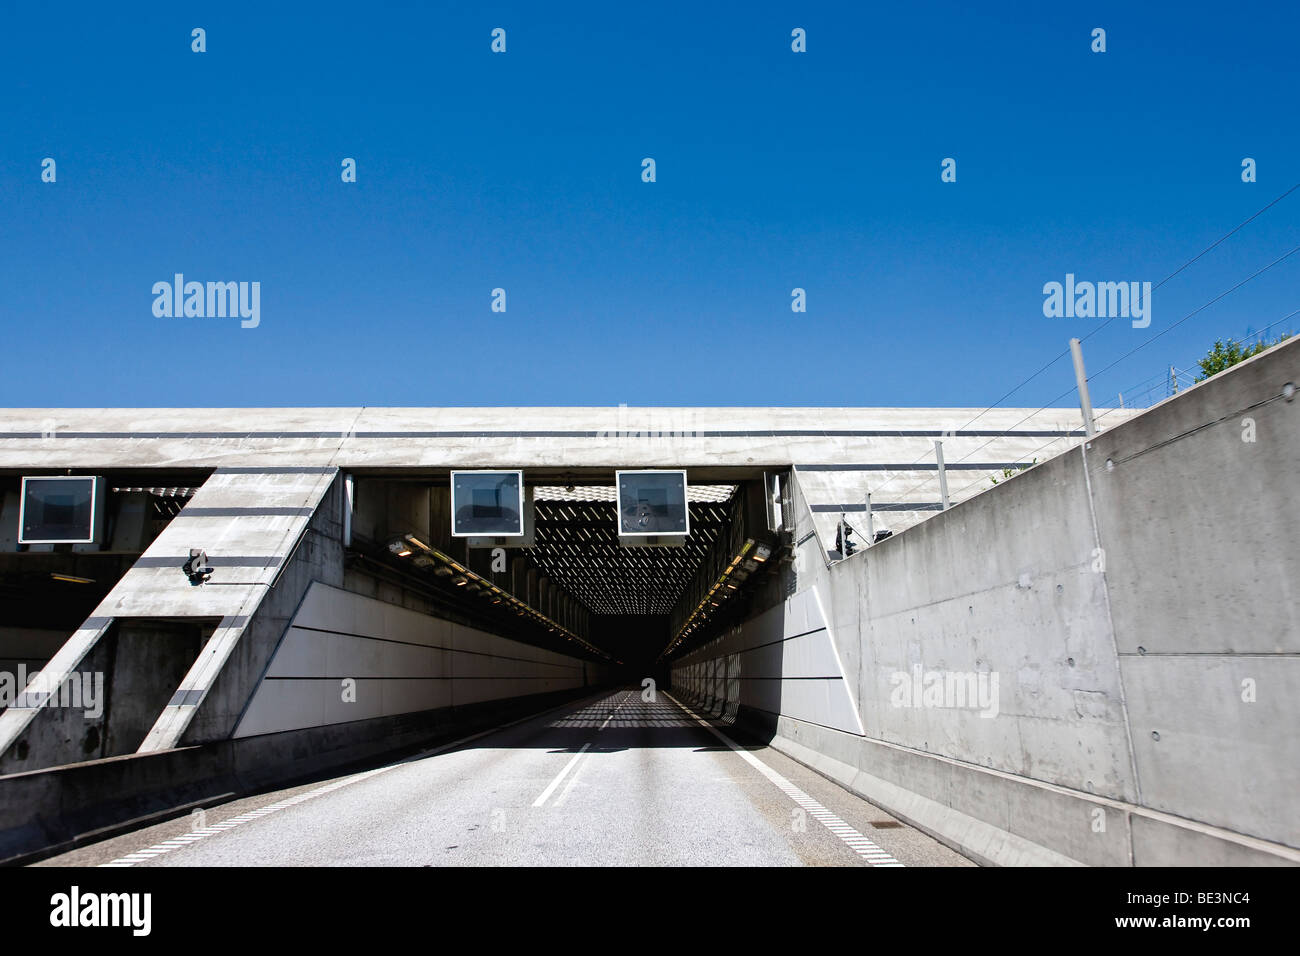 Entrance to the tunnel at the Oresund Bridge between Denmark and Sweden, Europe Stock Photo